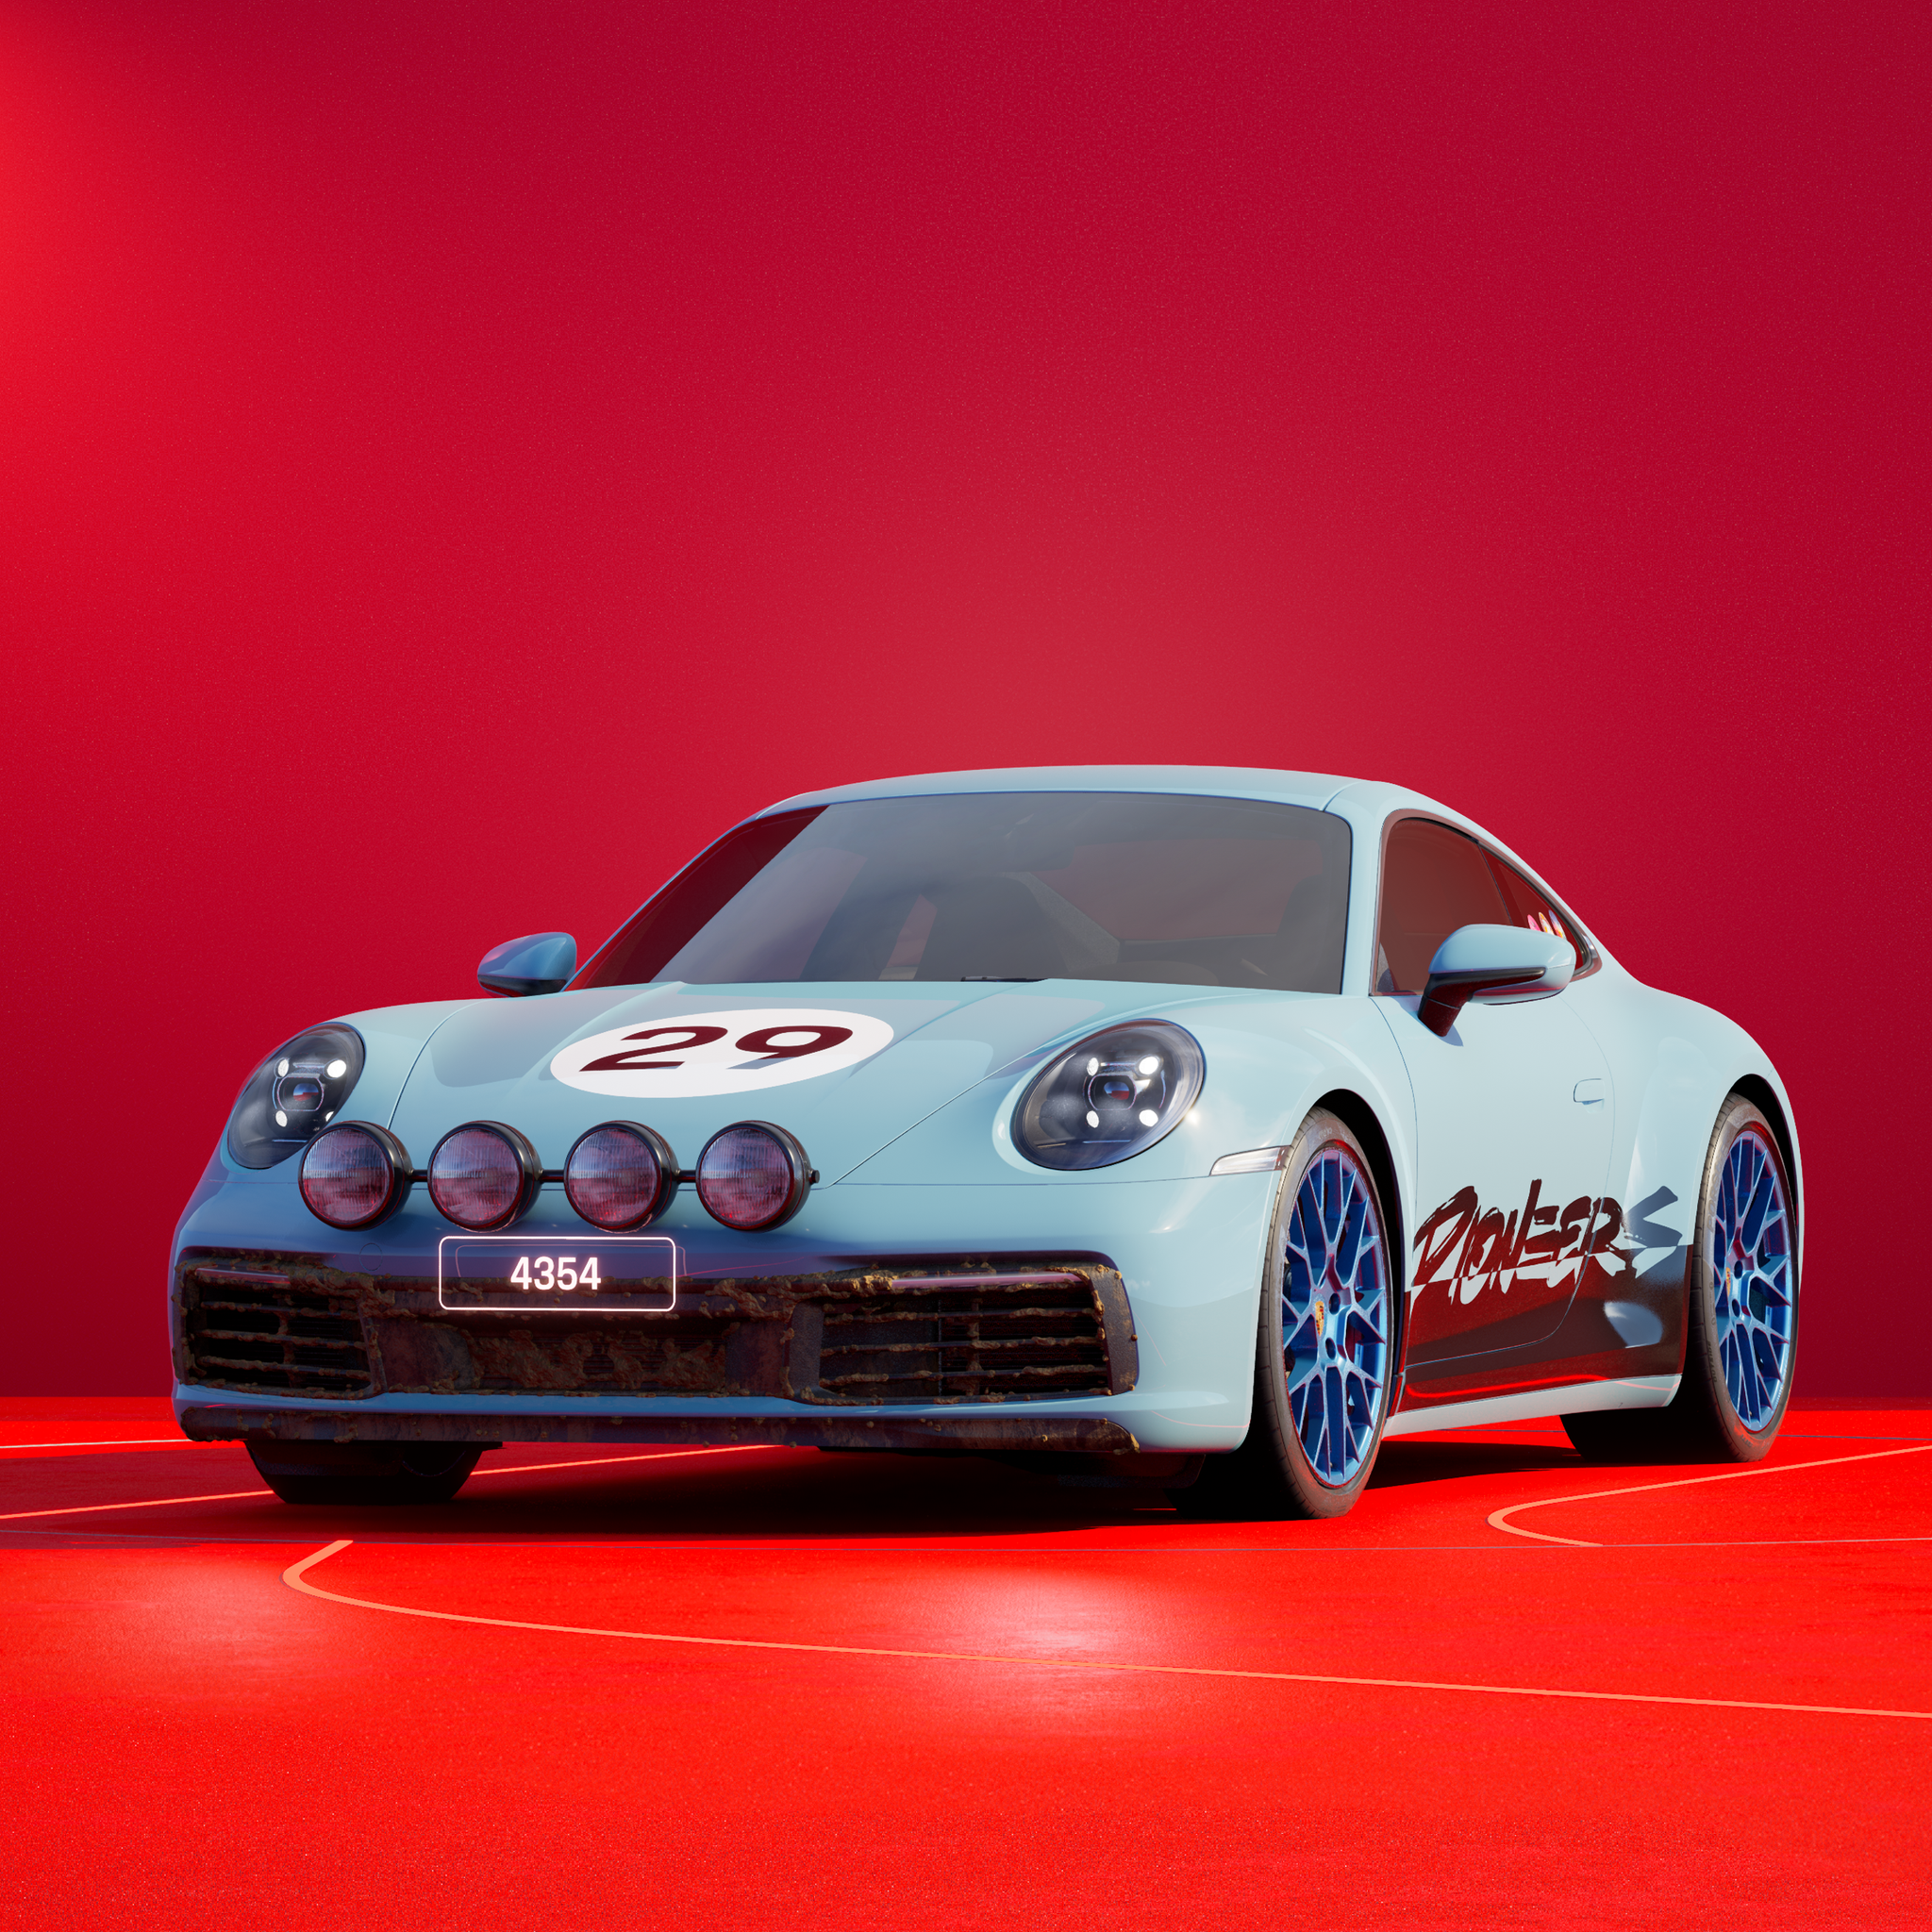 The PORSCHΞ 911 4354 image in phase